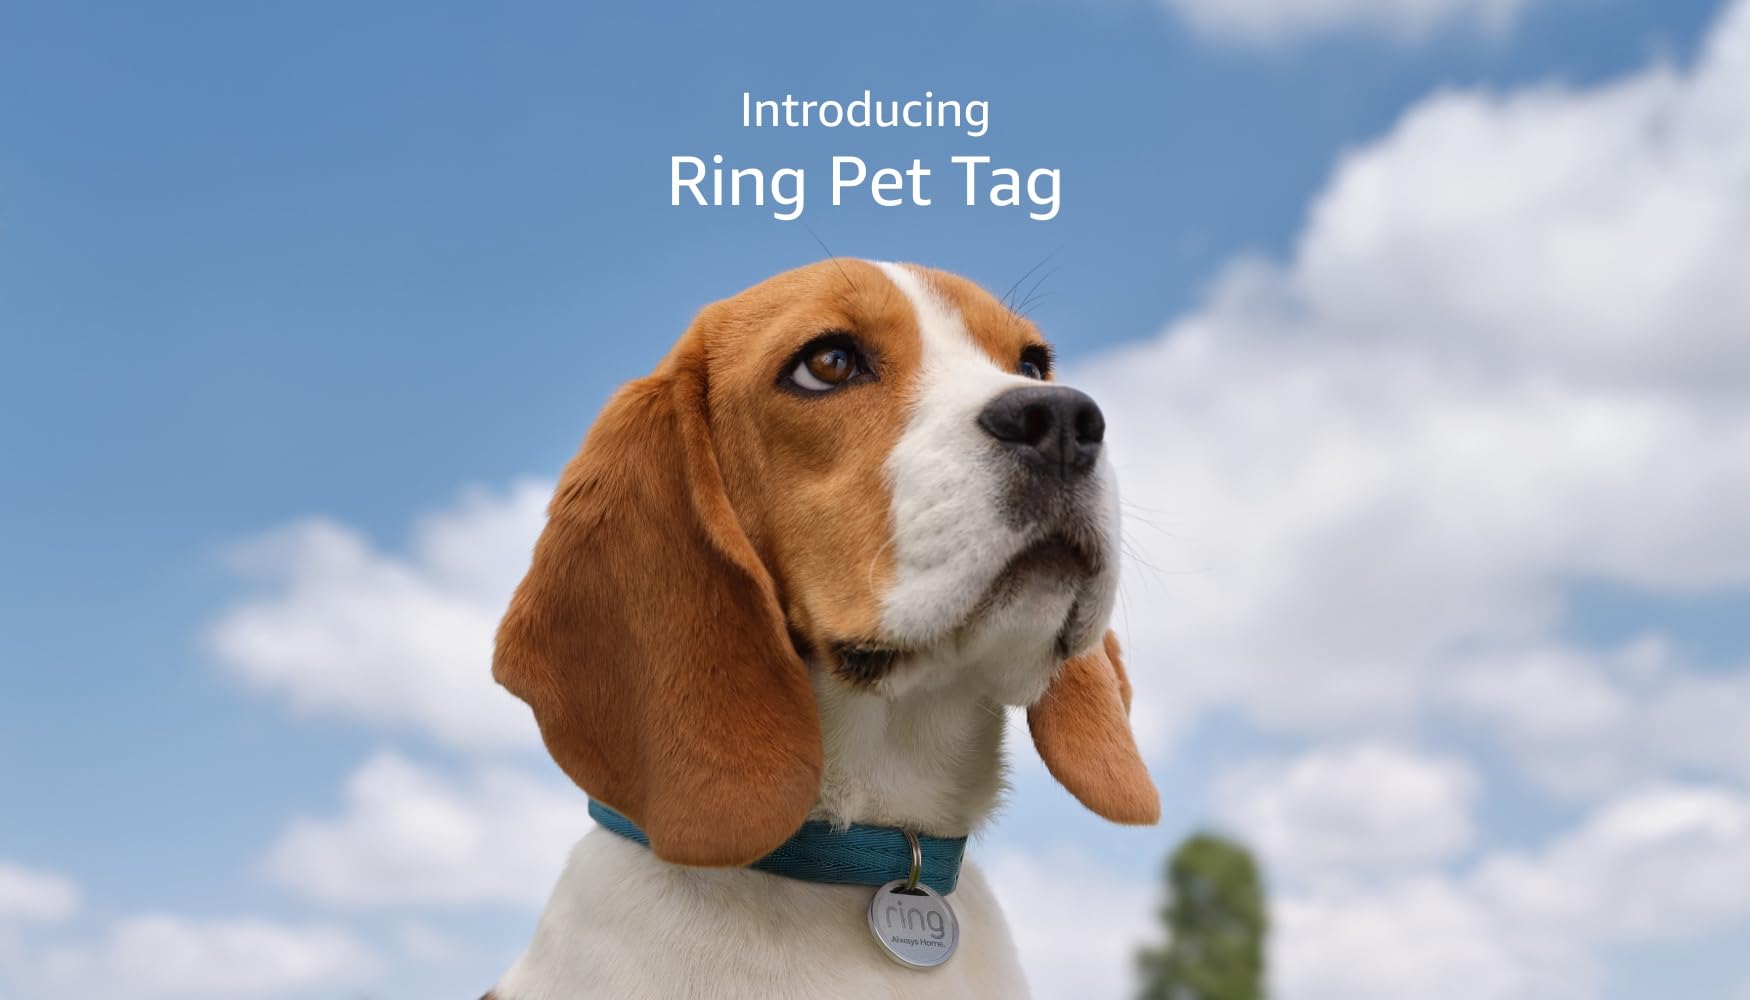 Ring Pet Tag | Easy-to-use tag with QR code | Real-time scan alerts | Shareable Pet Profile | No subscription or fees | 3-pack